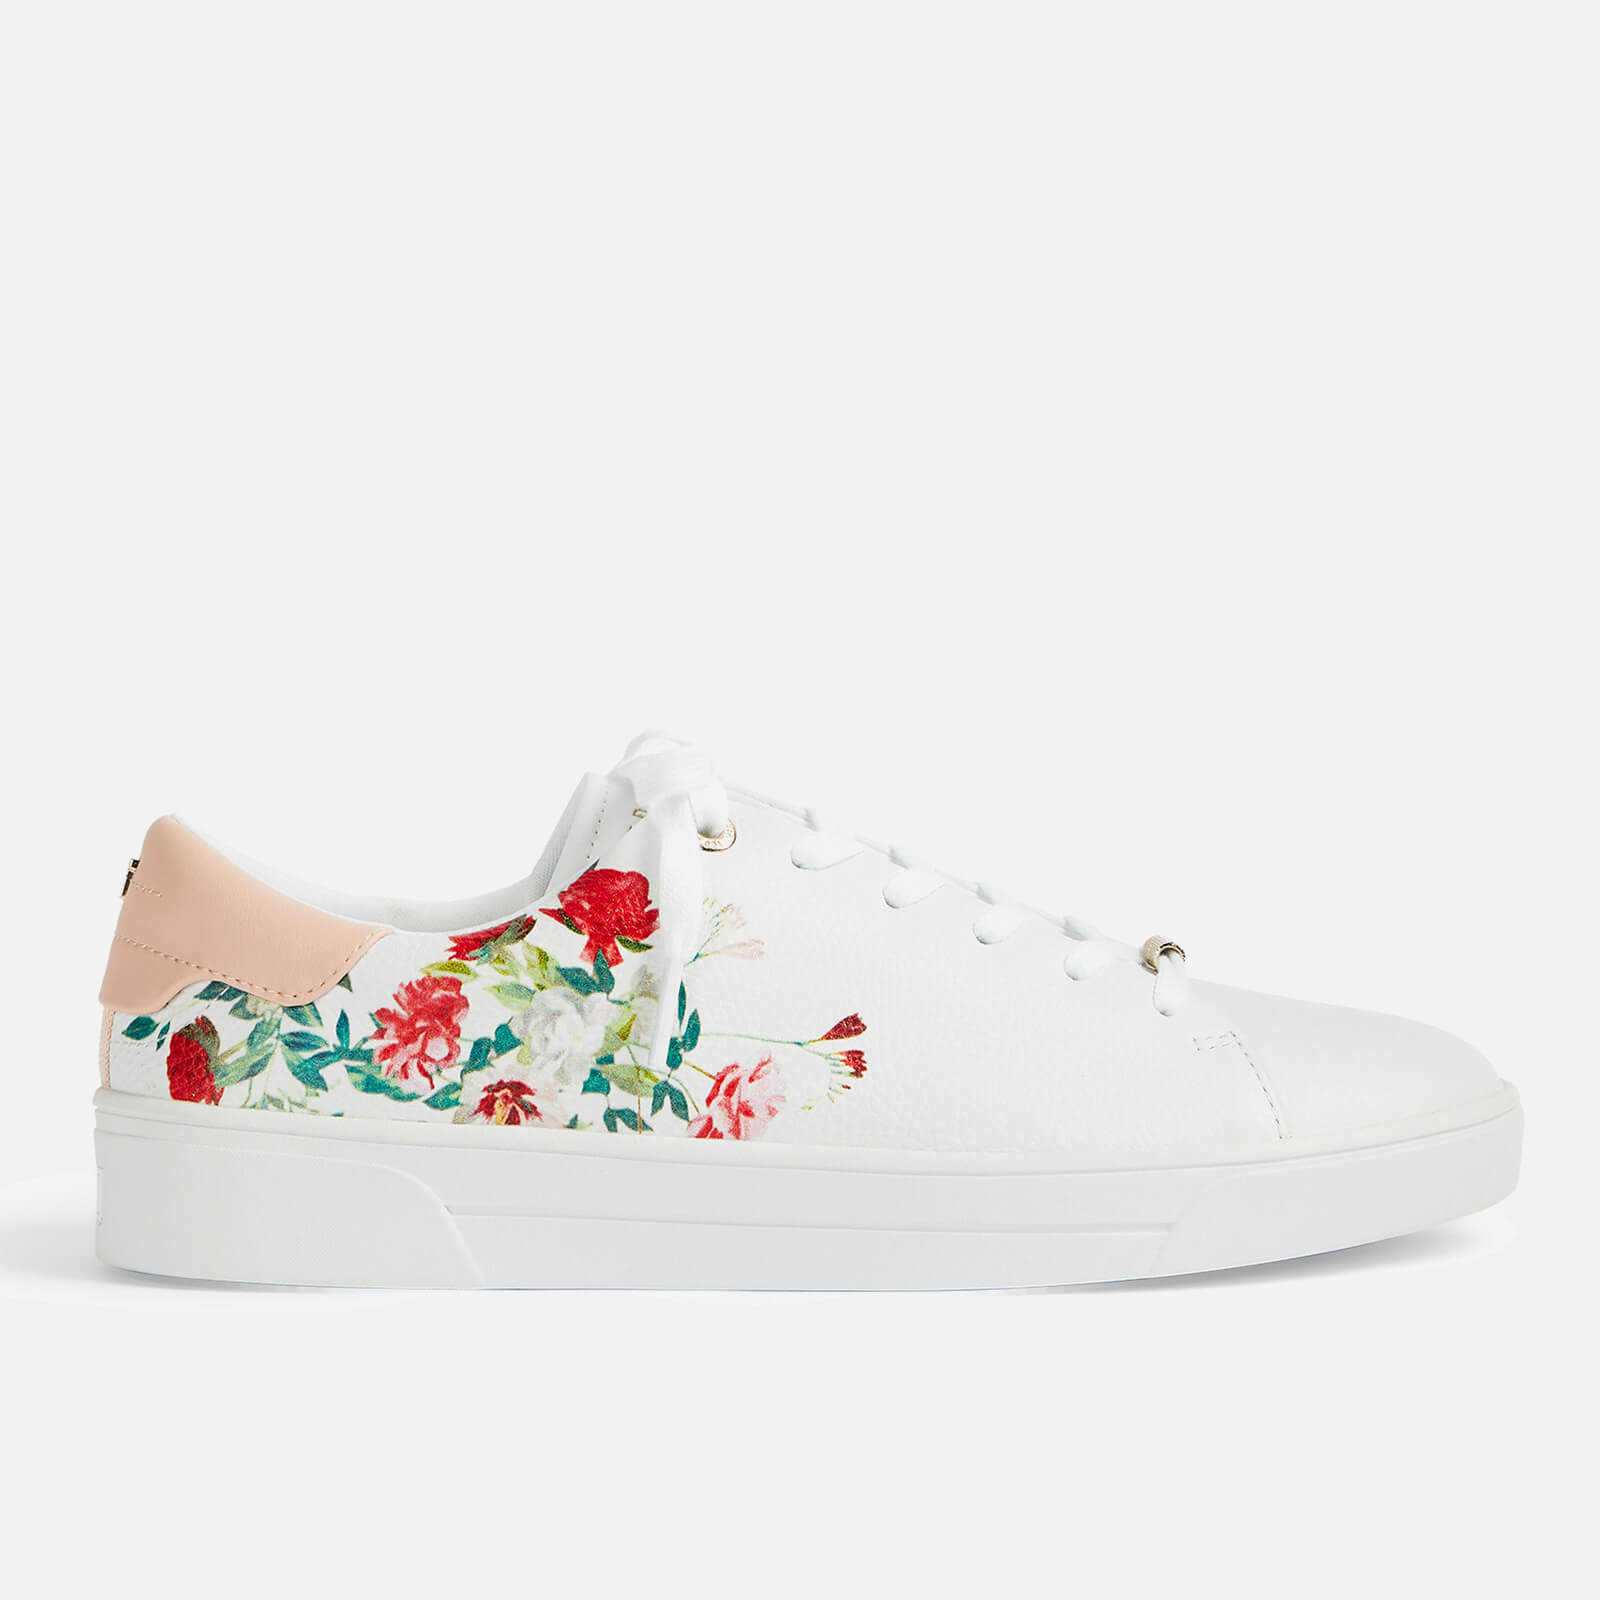 Ted Baker Women's Hayiden Cupsole Trainers - White - UK 3